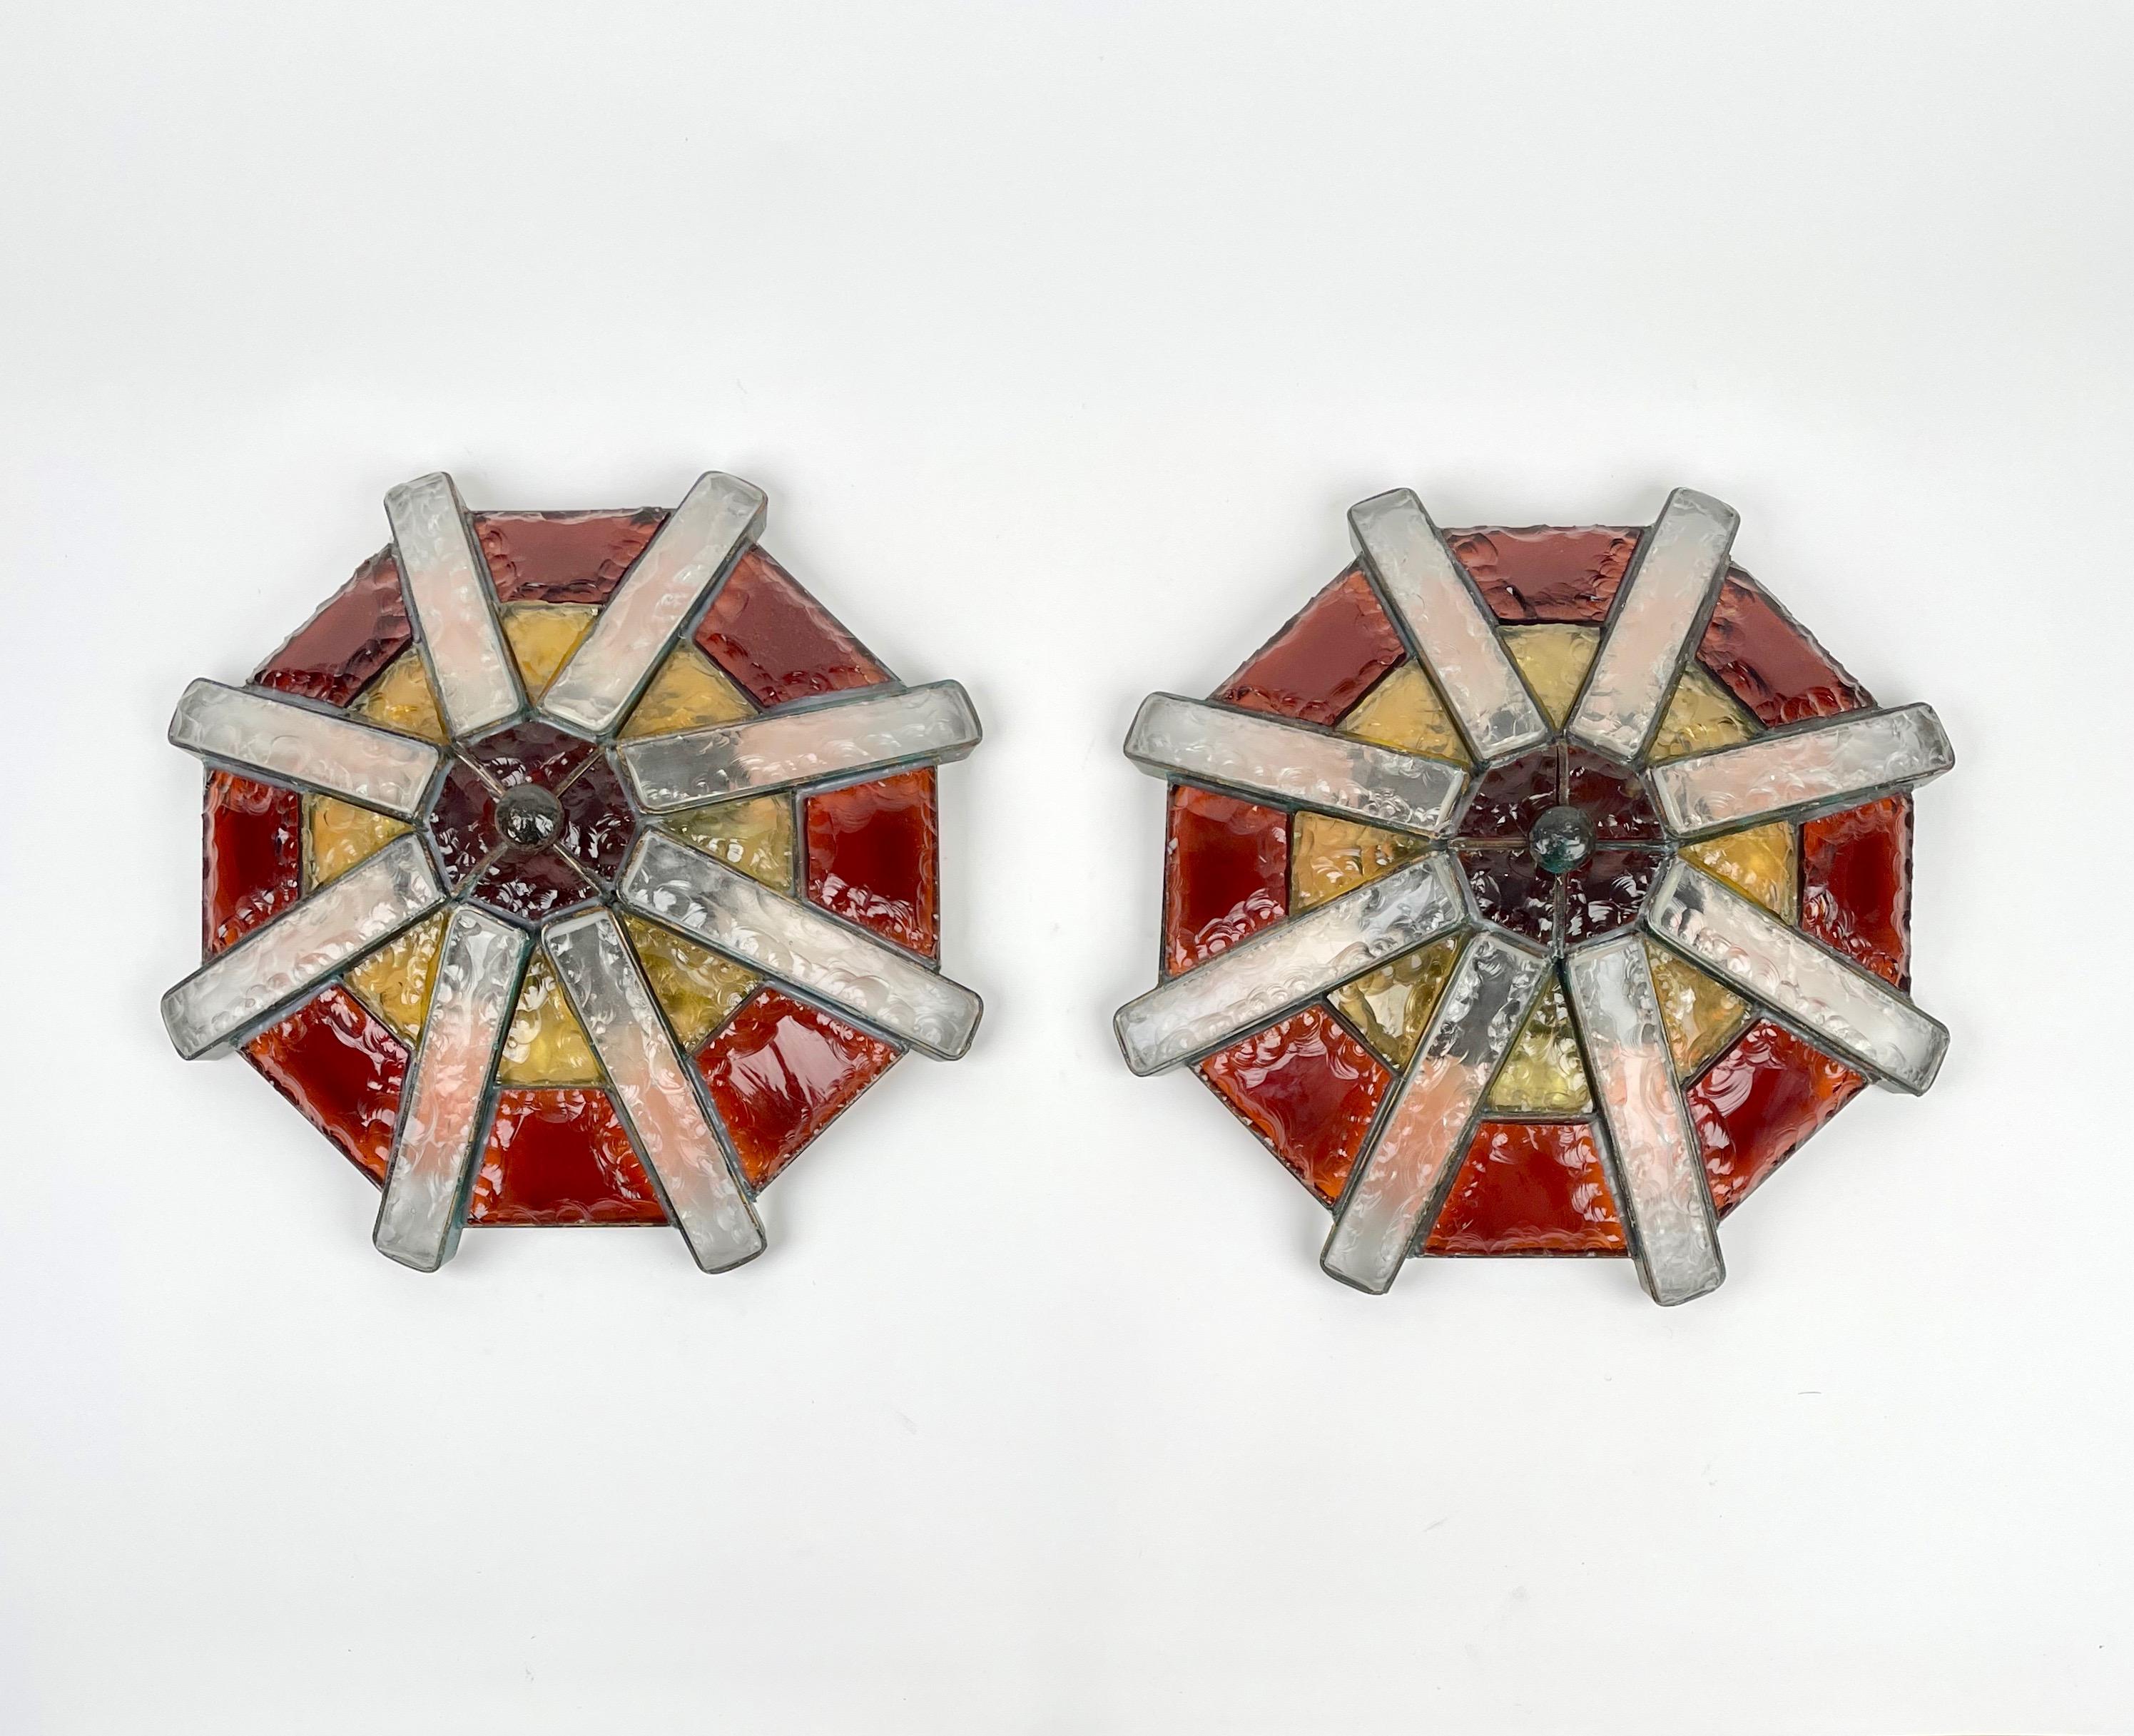 Pair of large flush mount ceiling lamps attributed to Poliarte in Verona, Italy, 1970s. The lamp radiates in geometric segments of alternating translucent and colored hand chipped glass creating a circular relief to break the light, in red, white